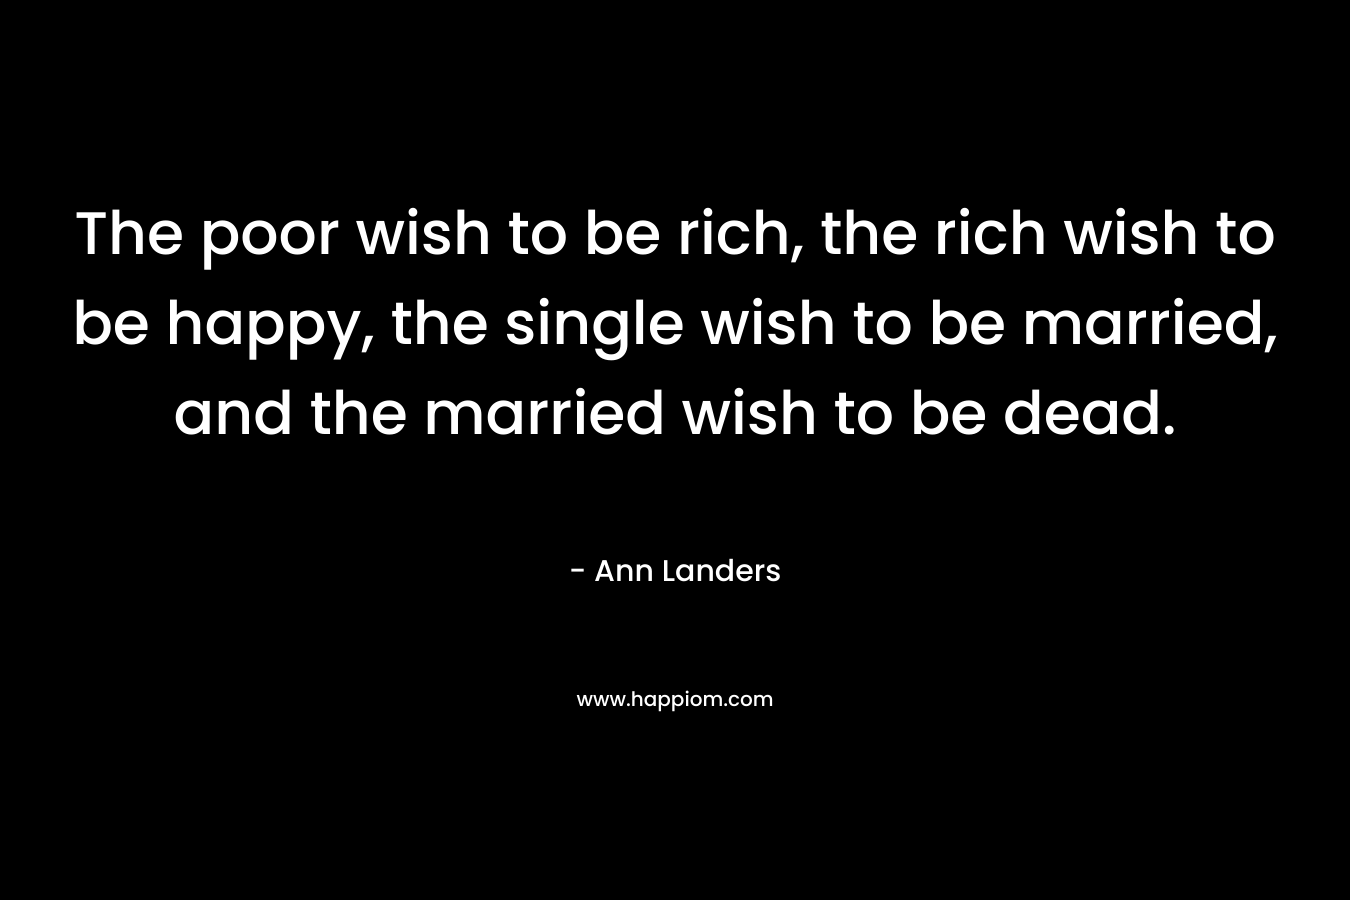 The poor wish to be rich, the rich wish to be happy, the single wish to be married, and the married wish to be dead.